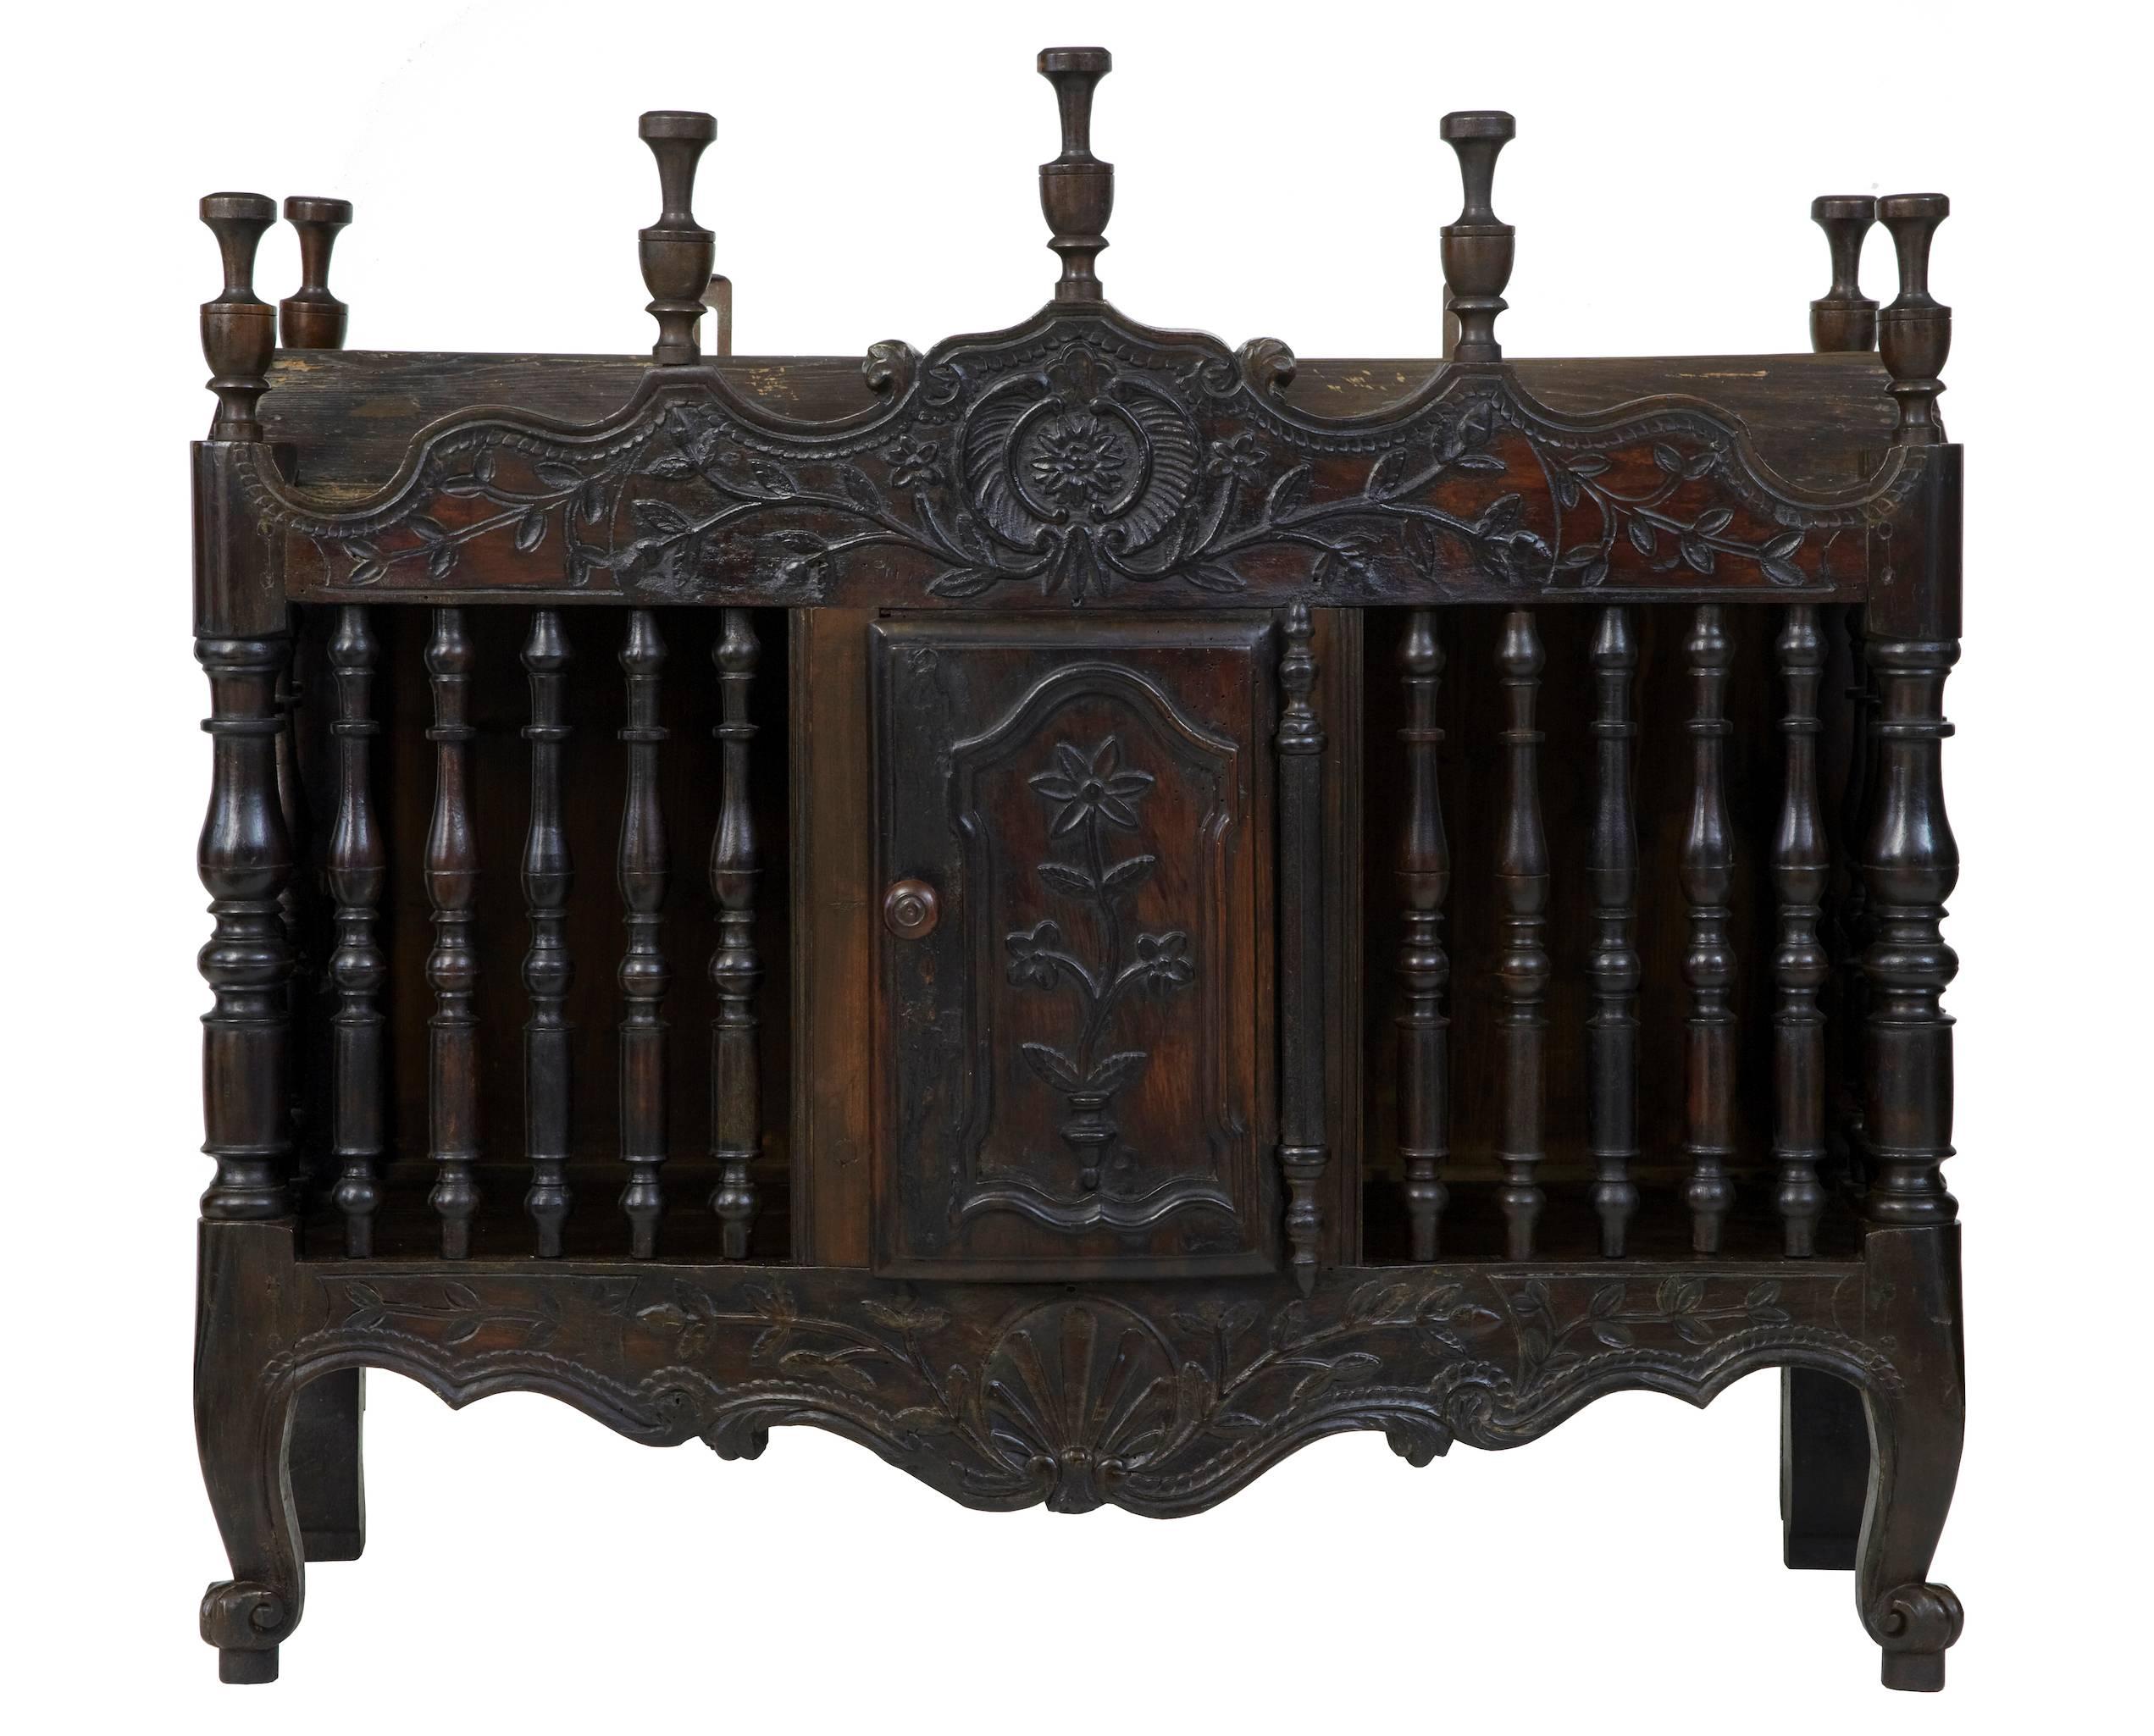 Fine French walnut panetiere, circa 1820.
Typical beautifully carved door and frieze, with spindles.
Dark rich color.
Later base board.
Evidence of old inactive worm.

Measures: Height: 34 1/4